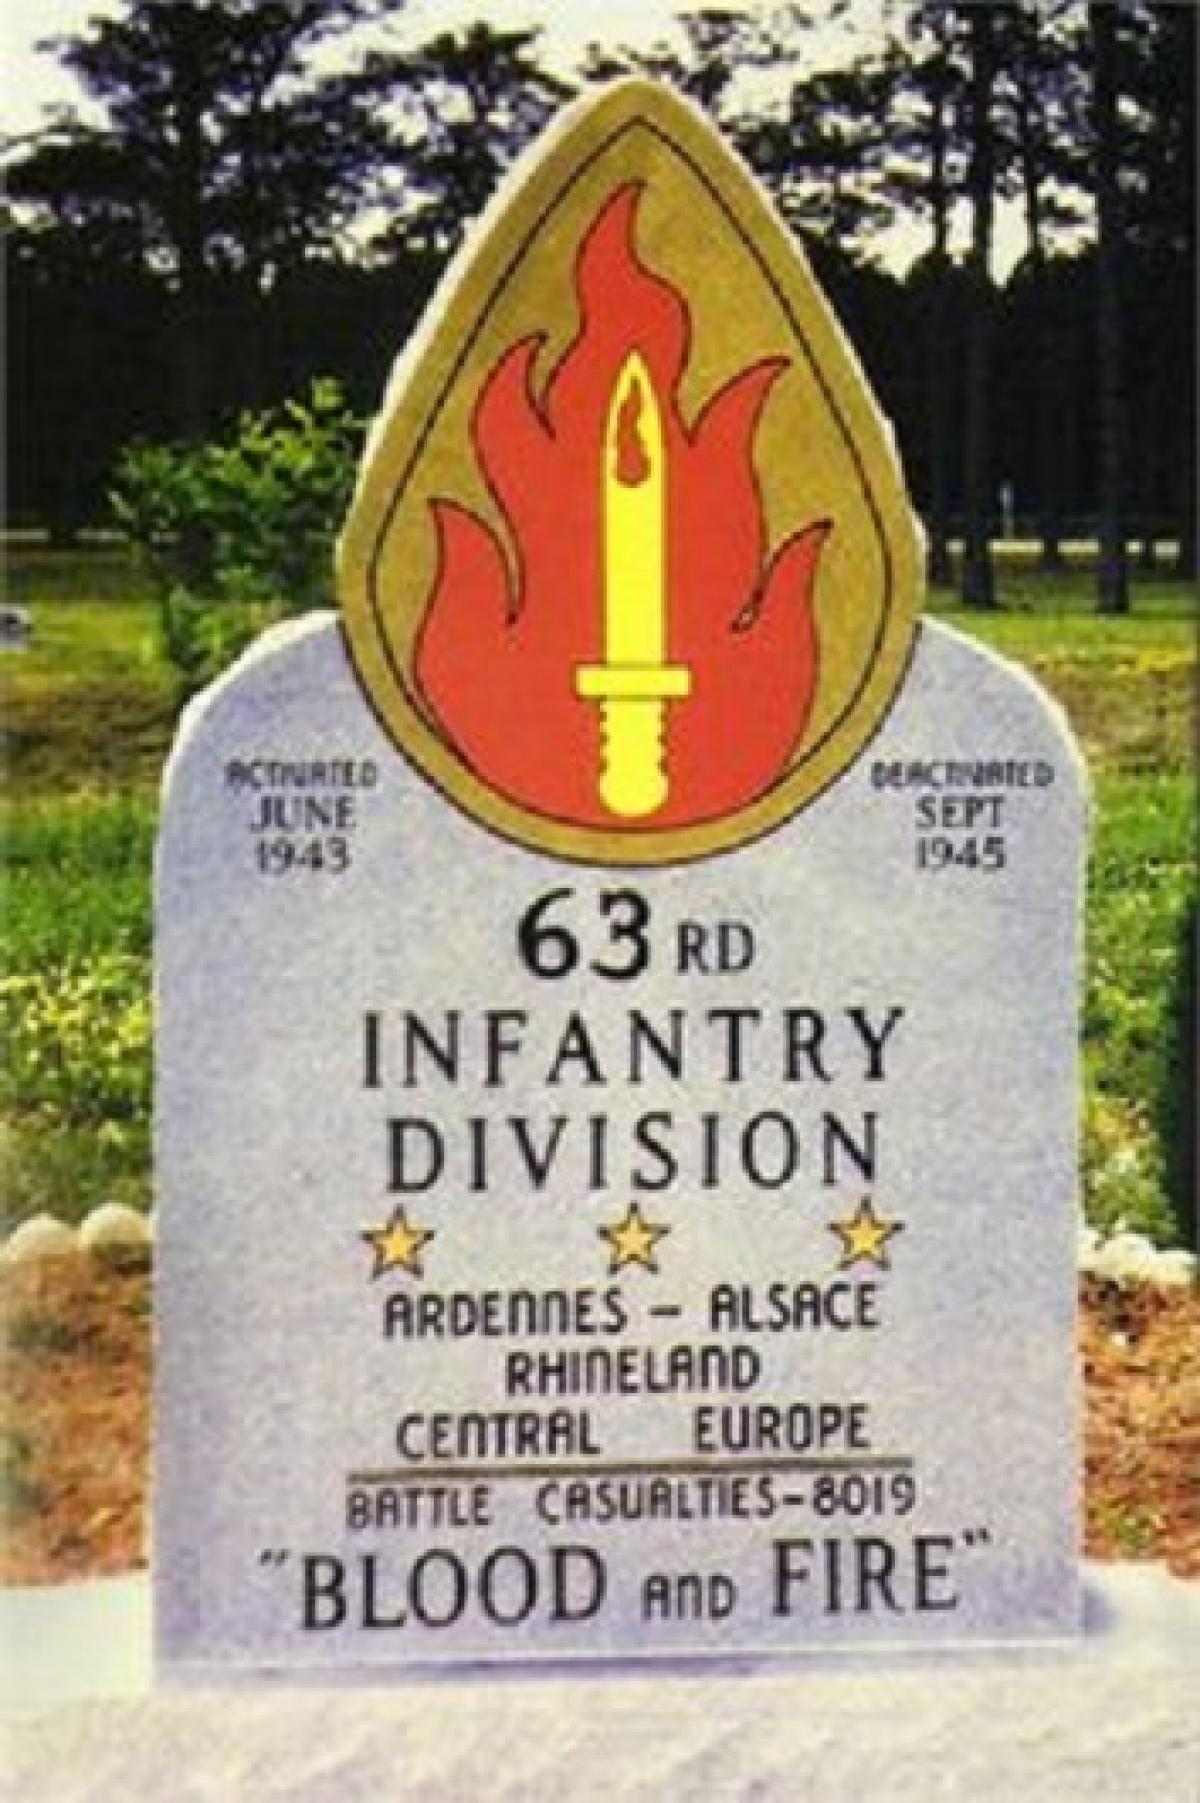 OK, Grove, Headstone Symbols and Meanings, U. S. Army 63rd Infantry Division (Blood and Fire)